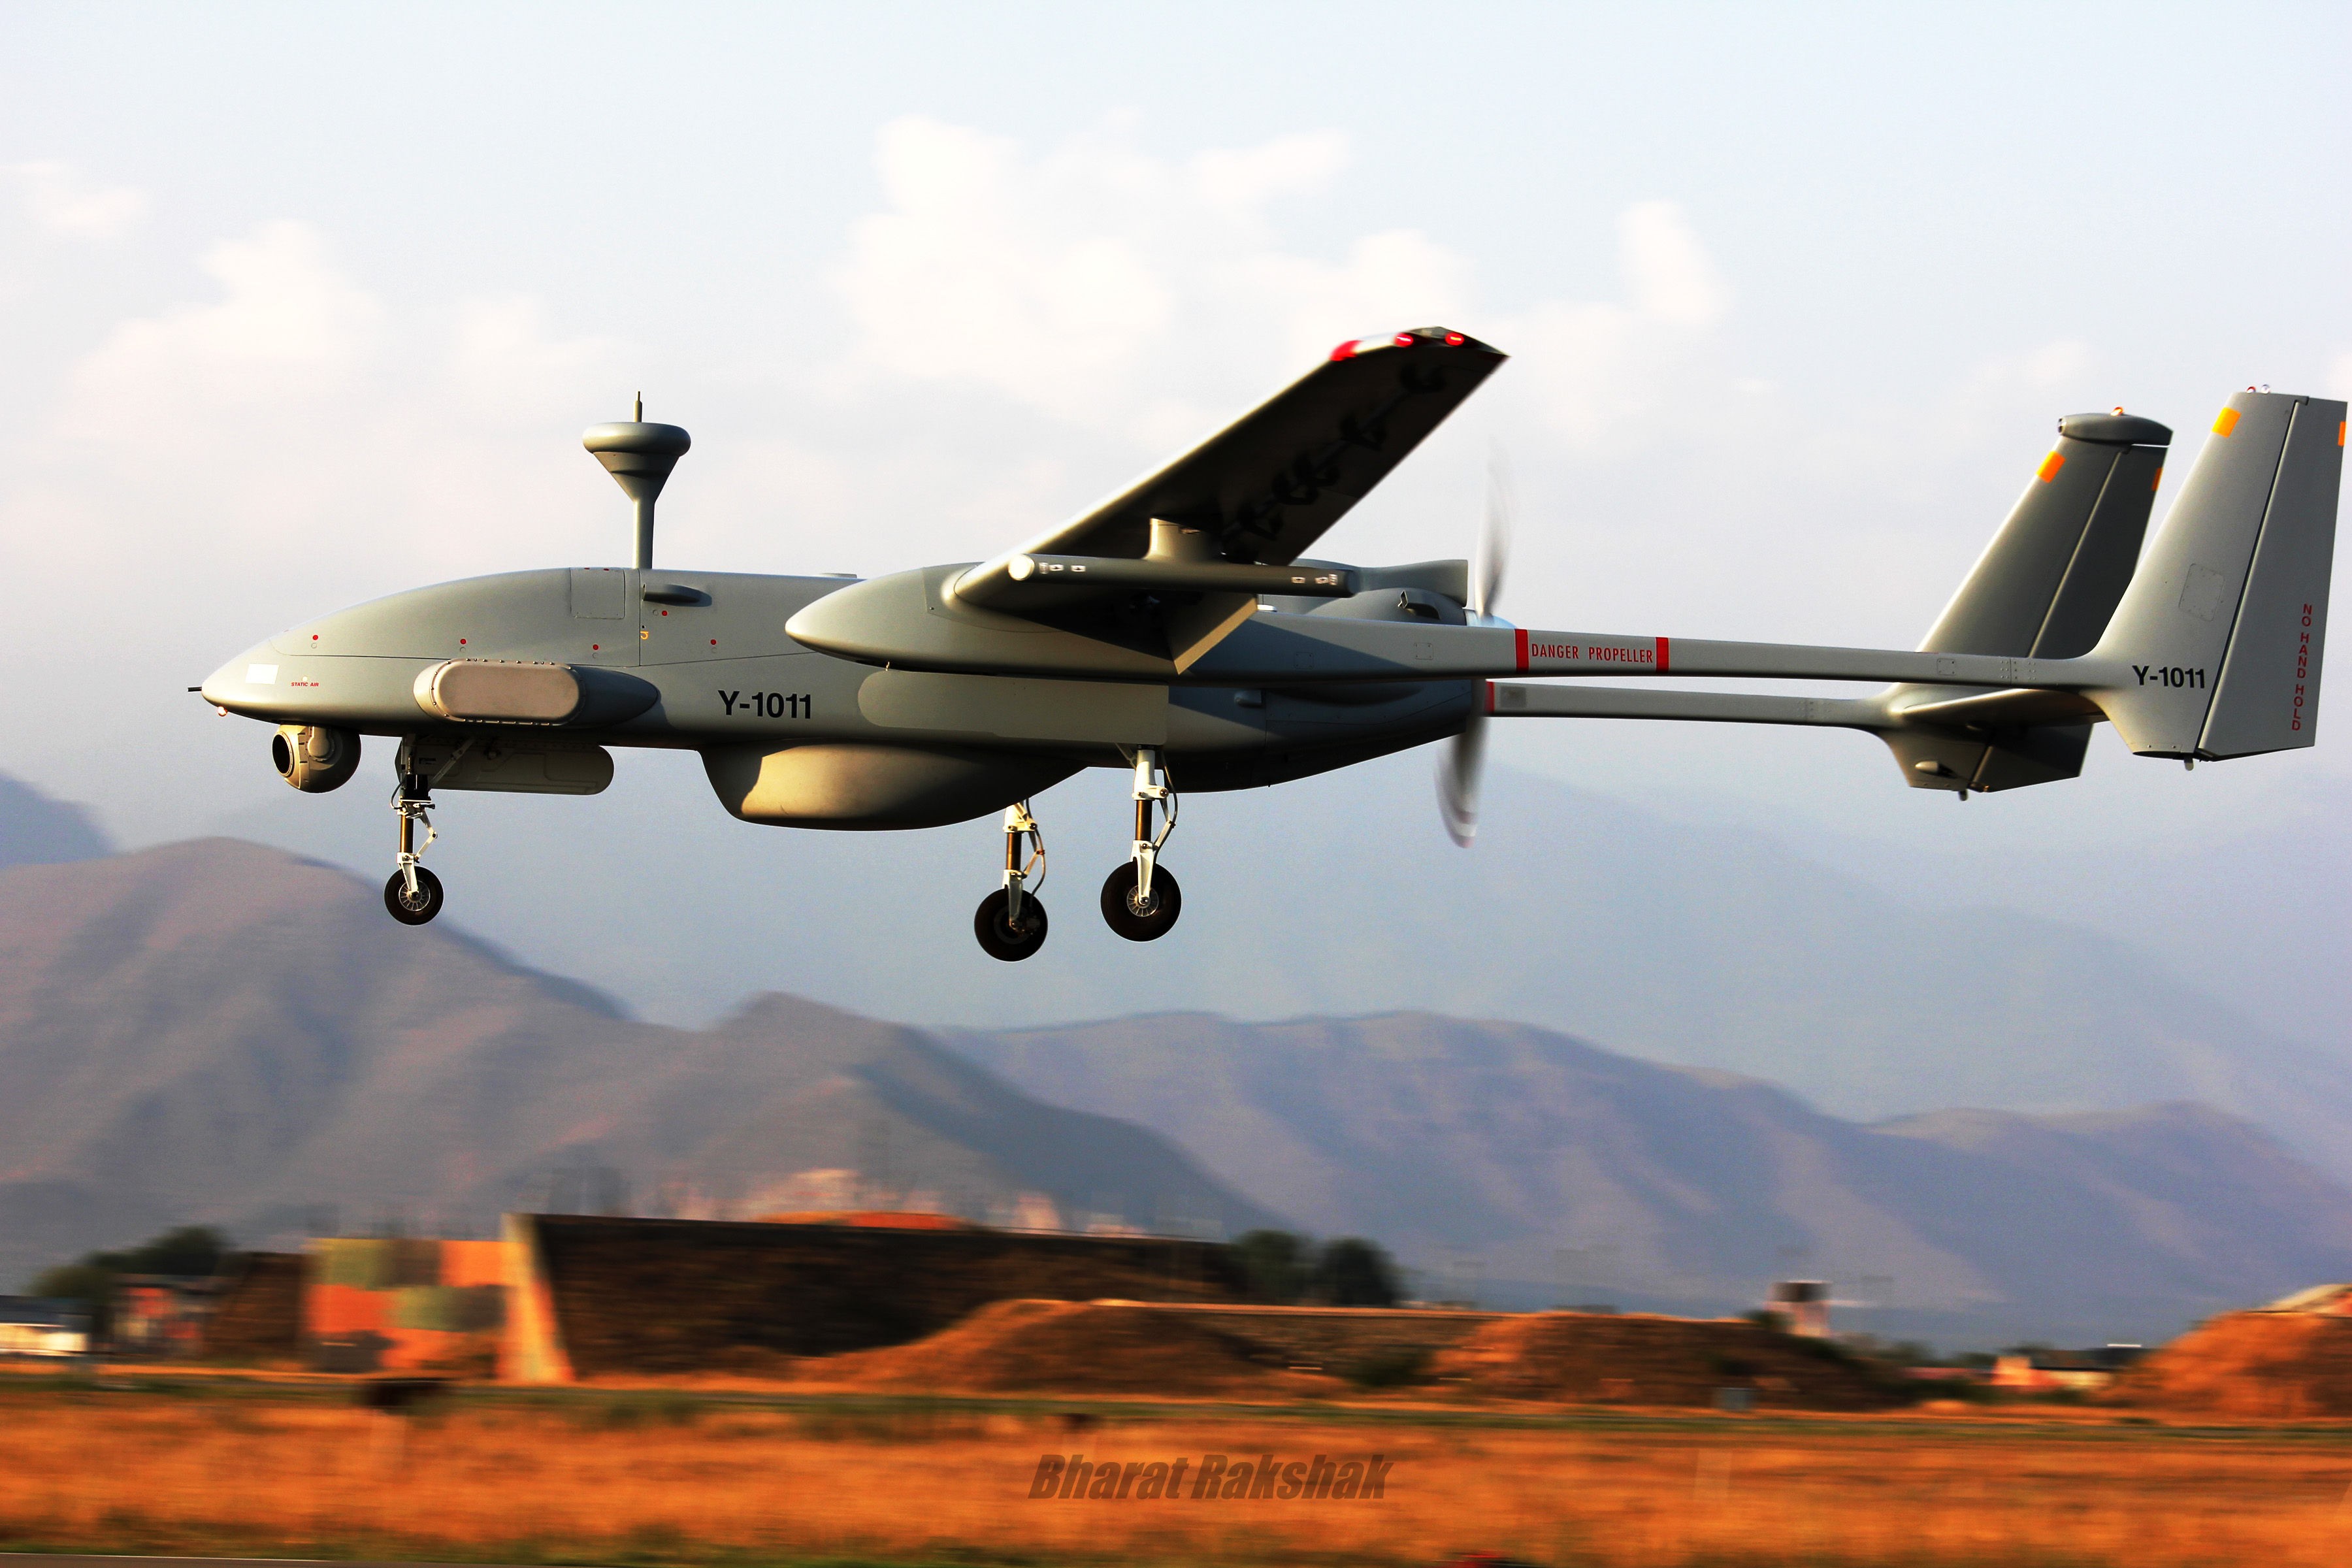 General 3600x2400 drone military UAVs military aircraft vehicle military vehicle clouds motion blur